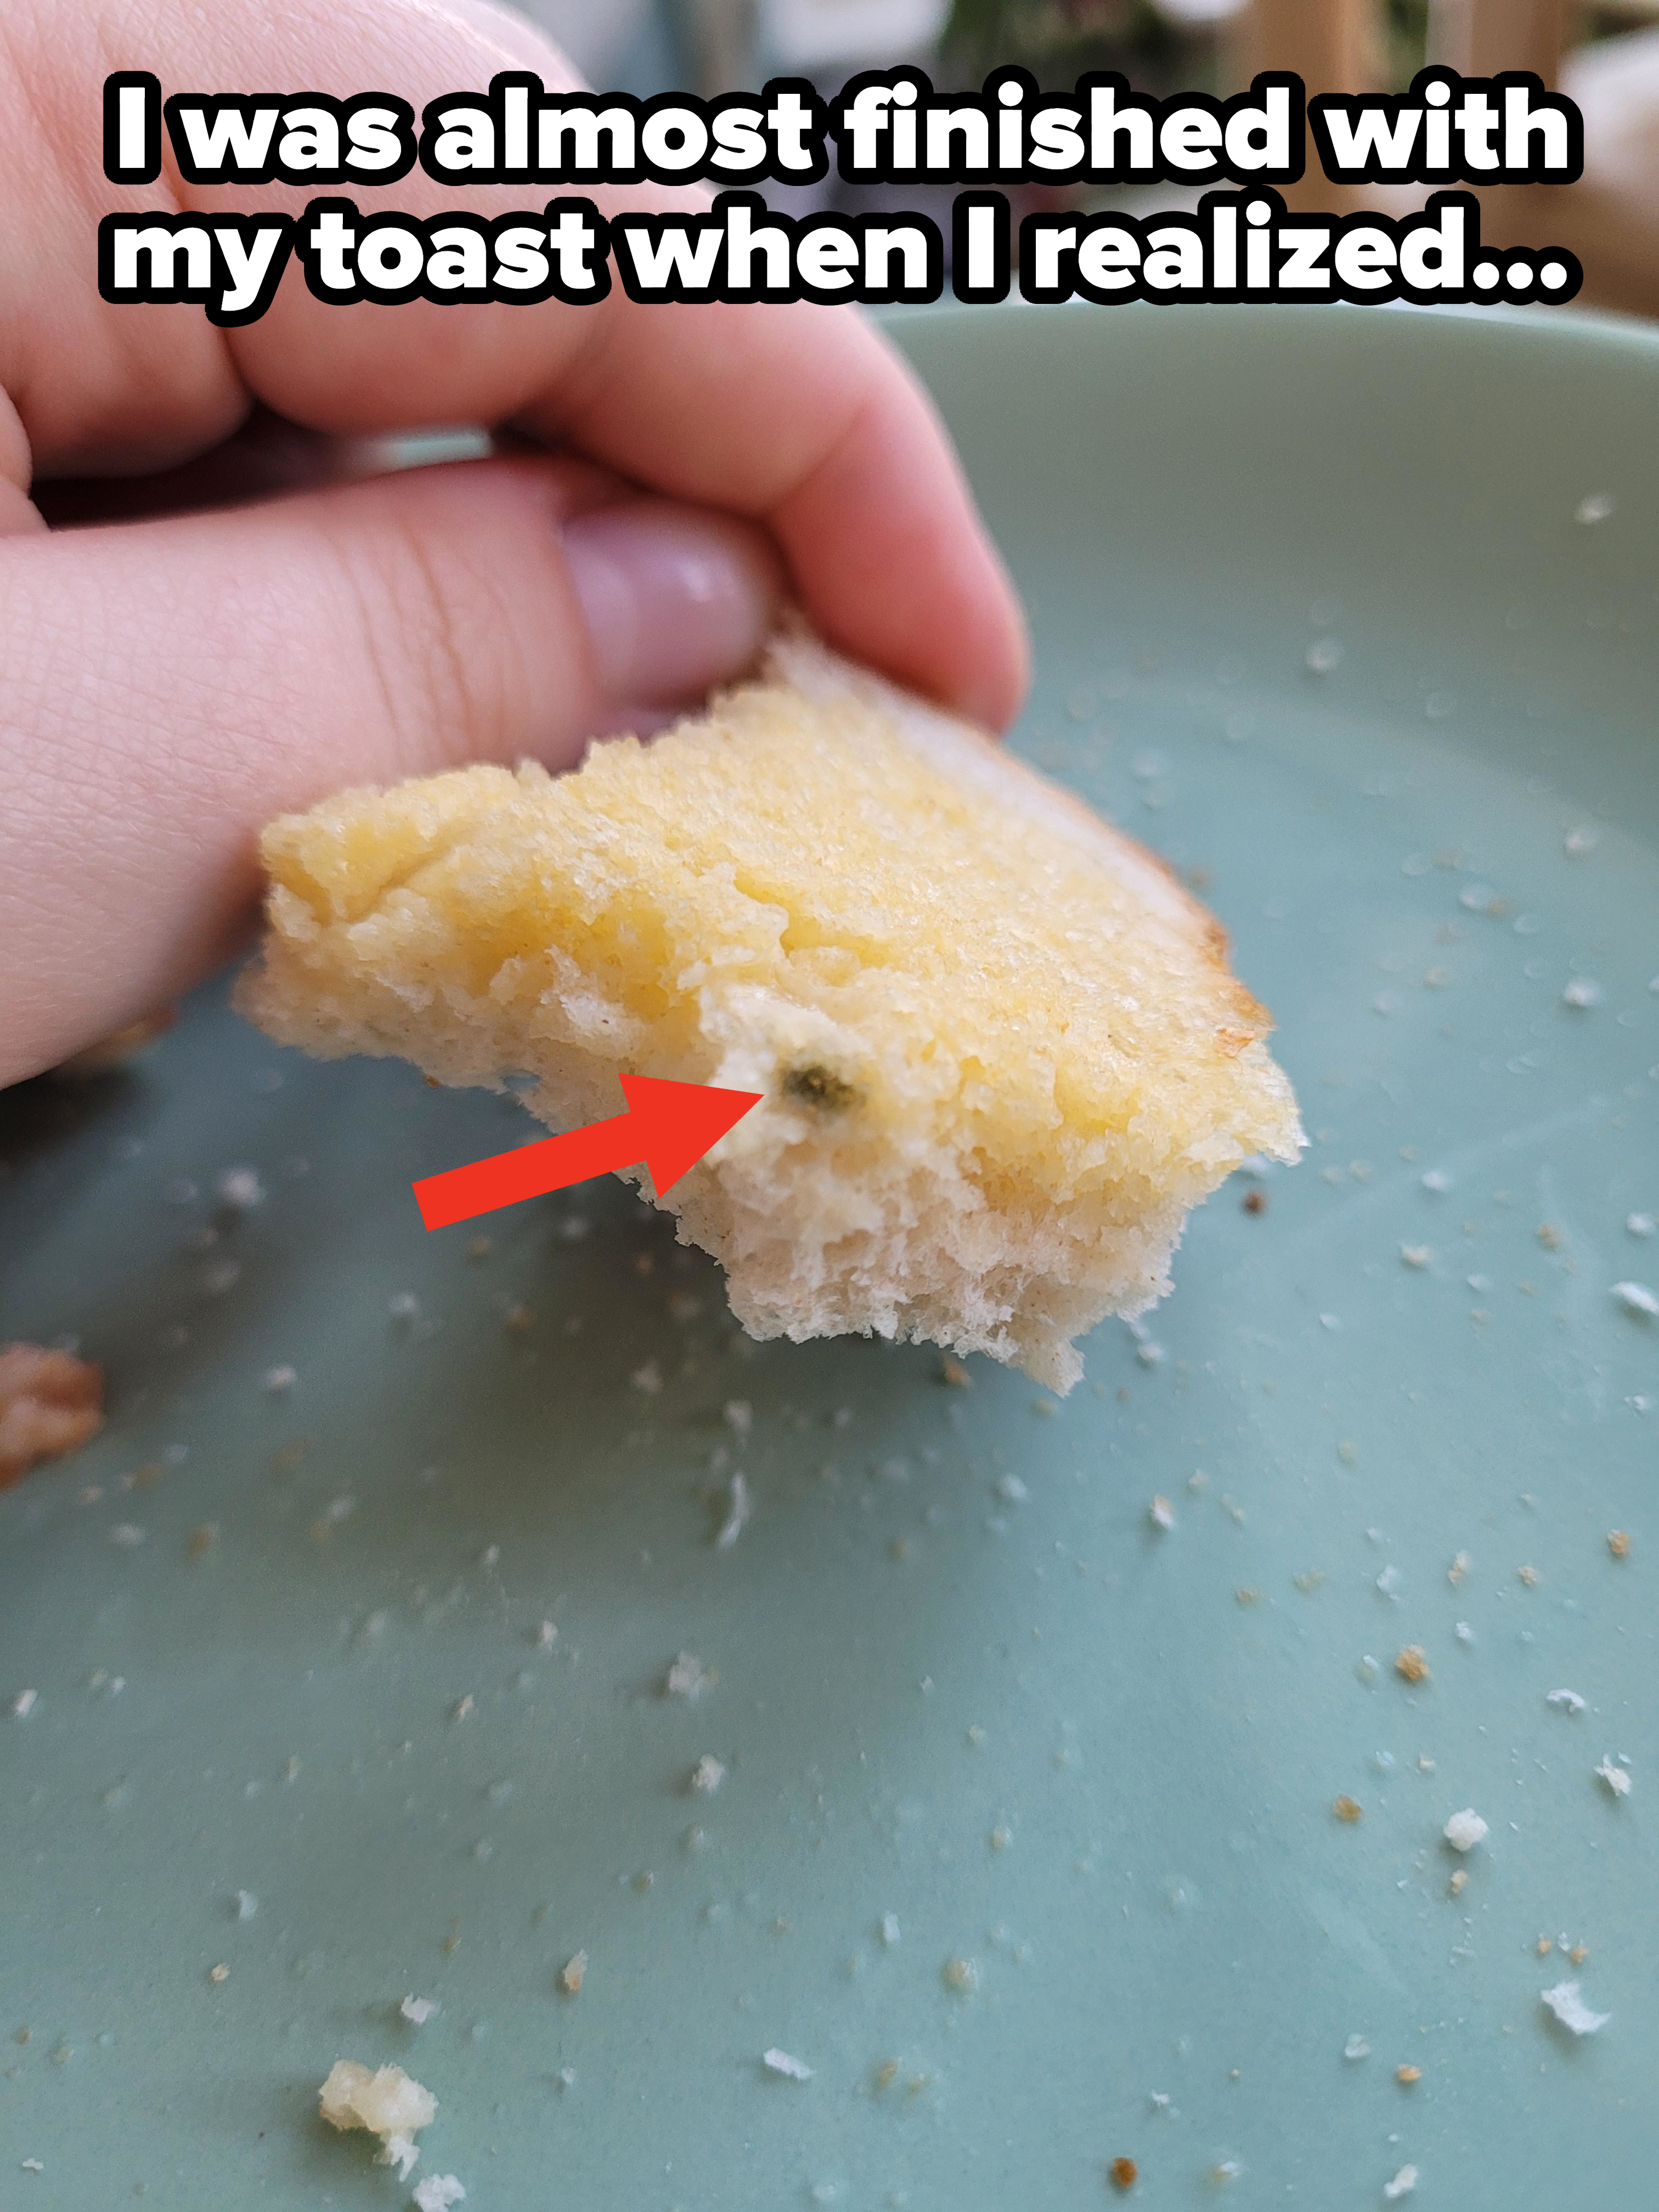 Close-up of some mold on toast, with caption &quot;I was almost finished with my toast when I realized&quot;